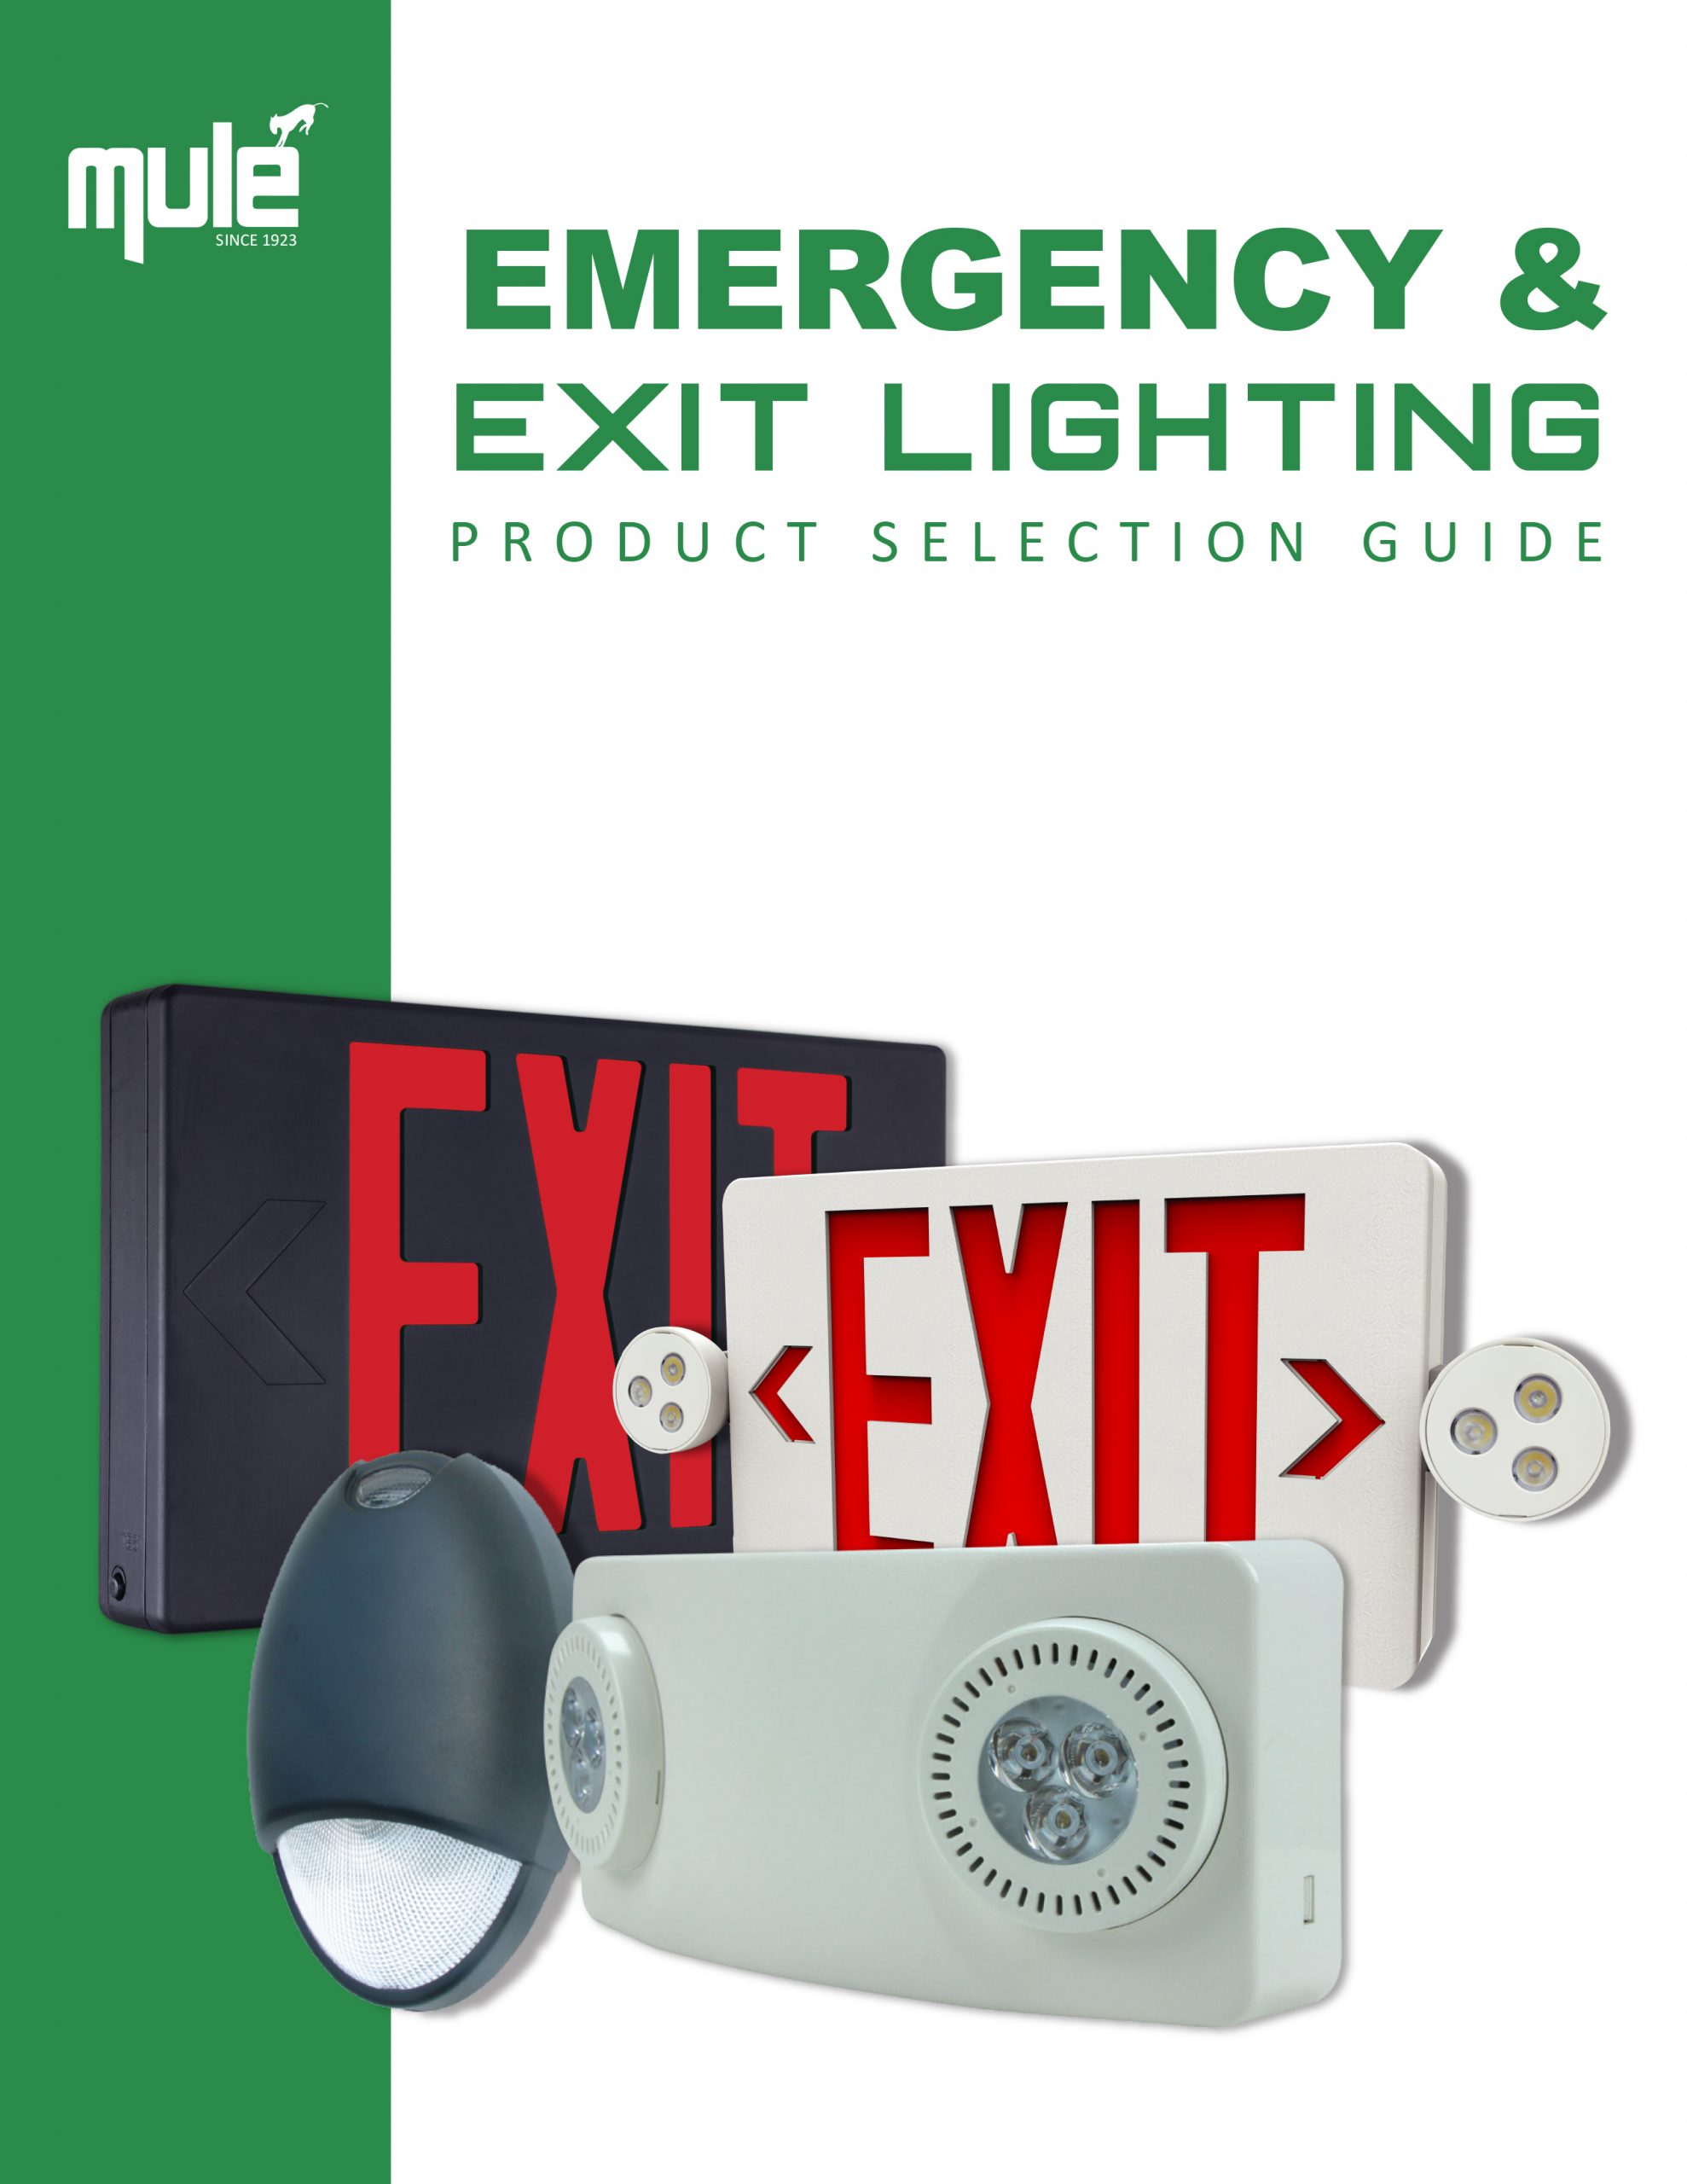 Mule Lighting Product Selection Guide E-Catalog Literature